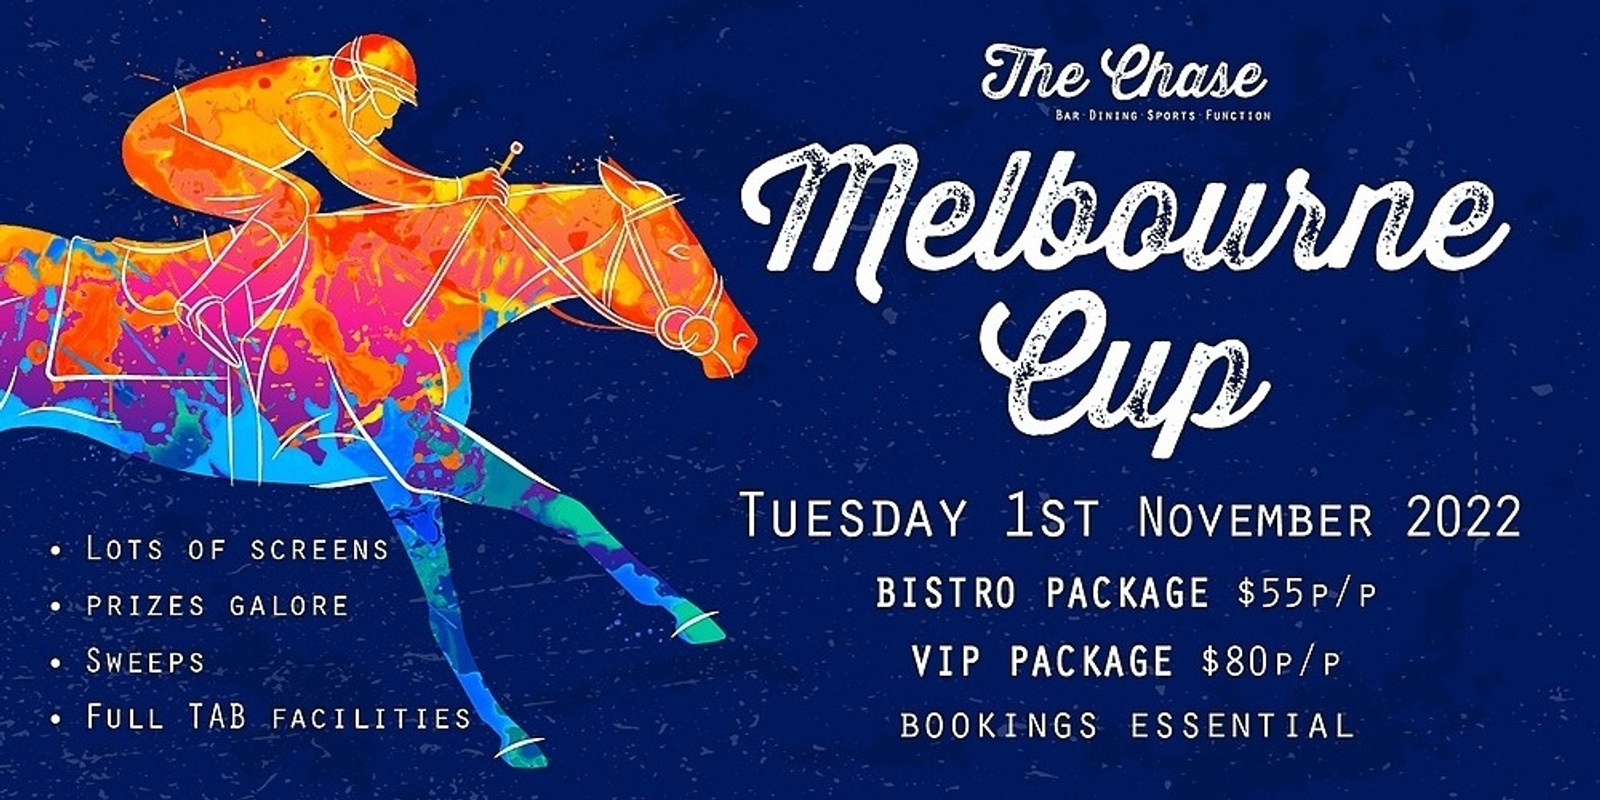 Banner image for Melbourne Cup